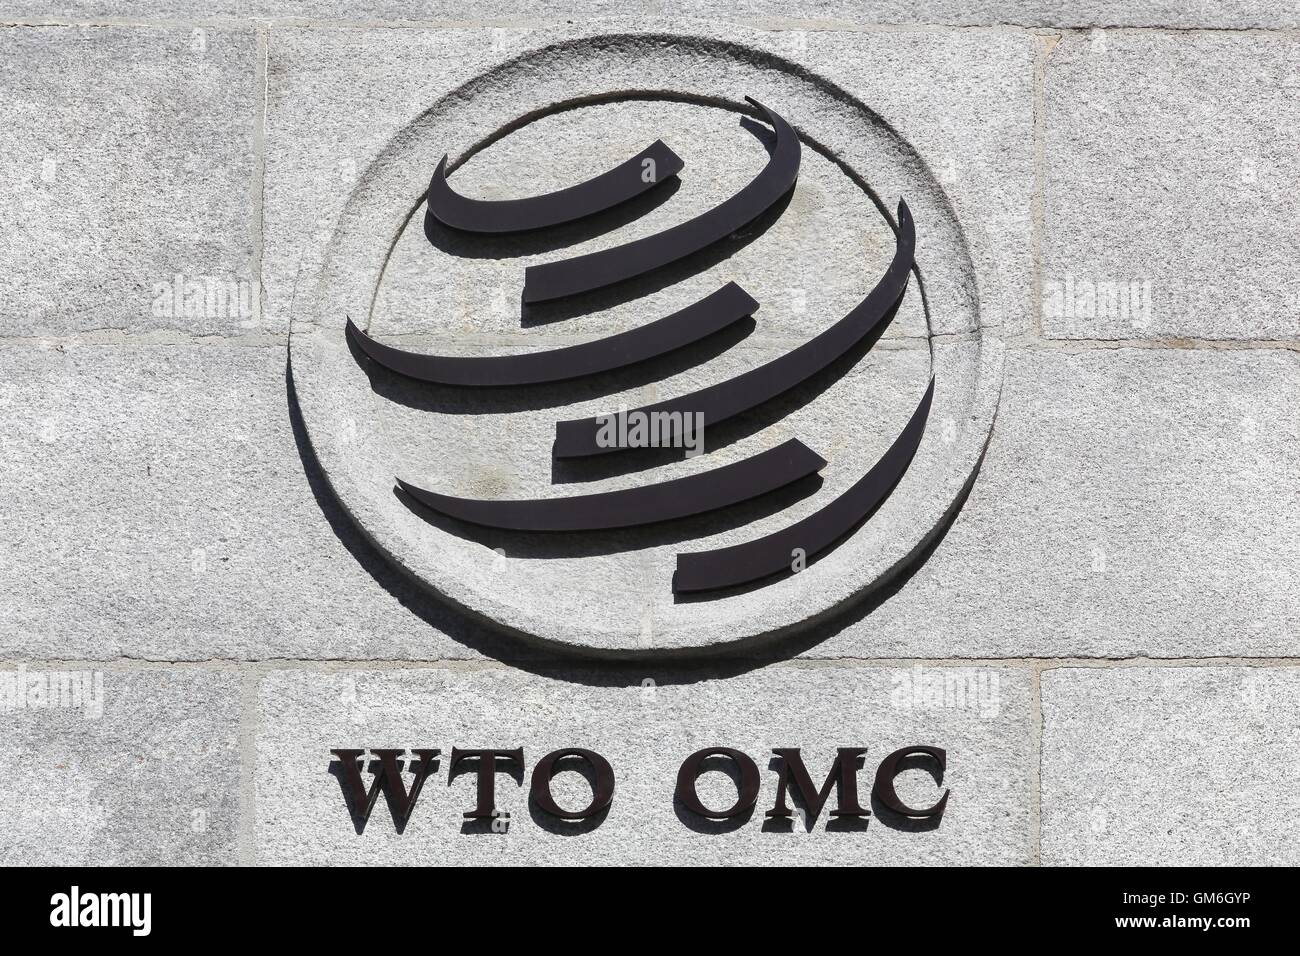 The World Trade Organization sign on a wall Stock Photo